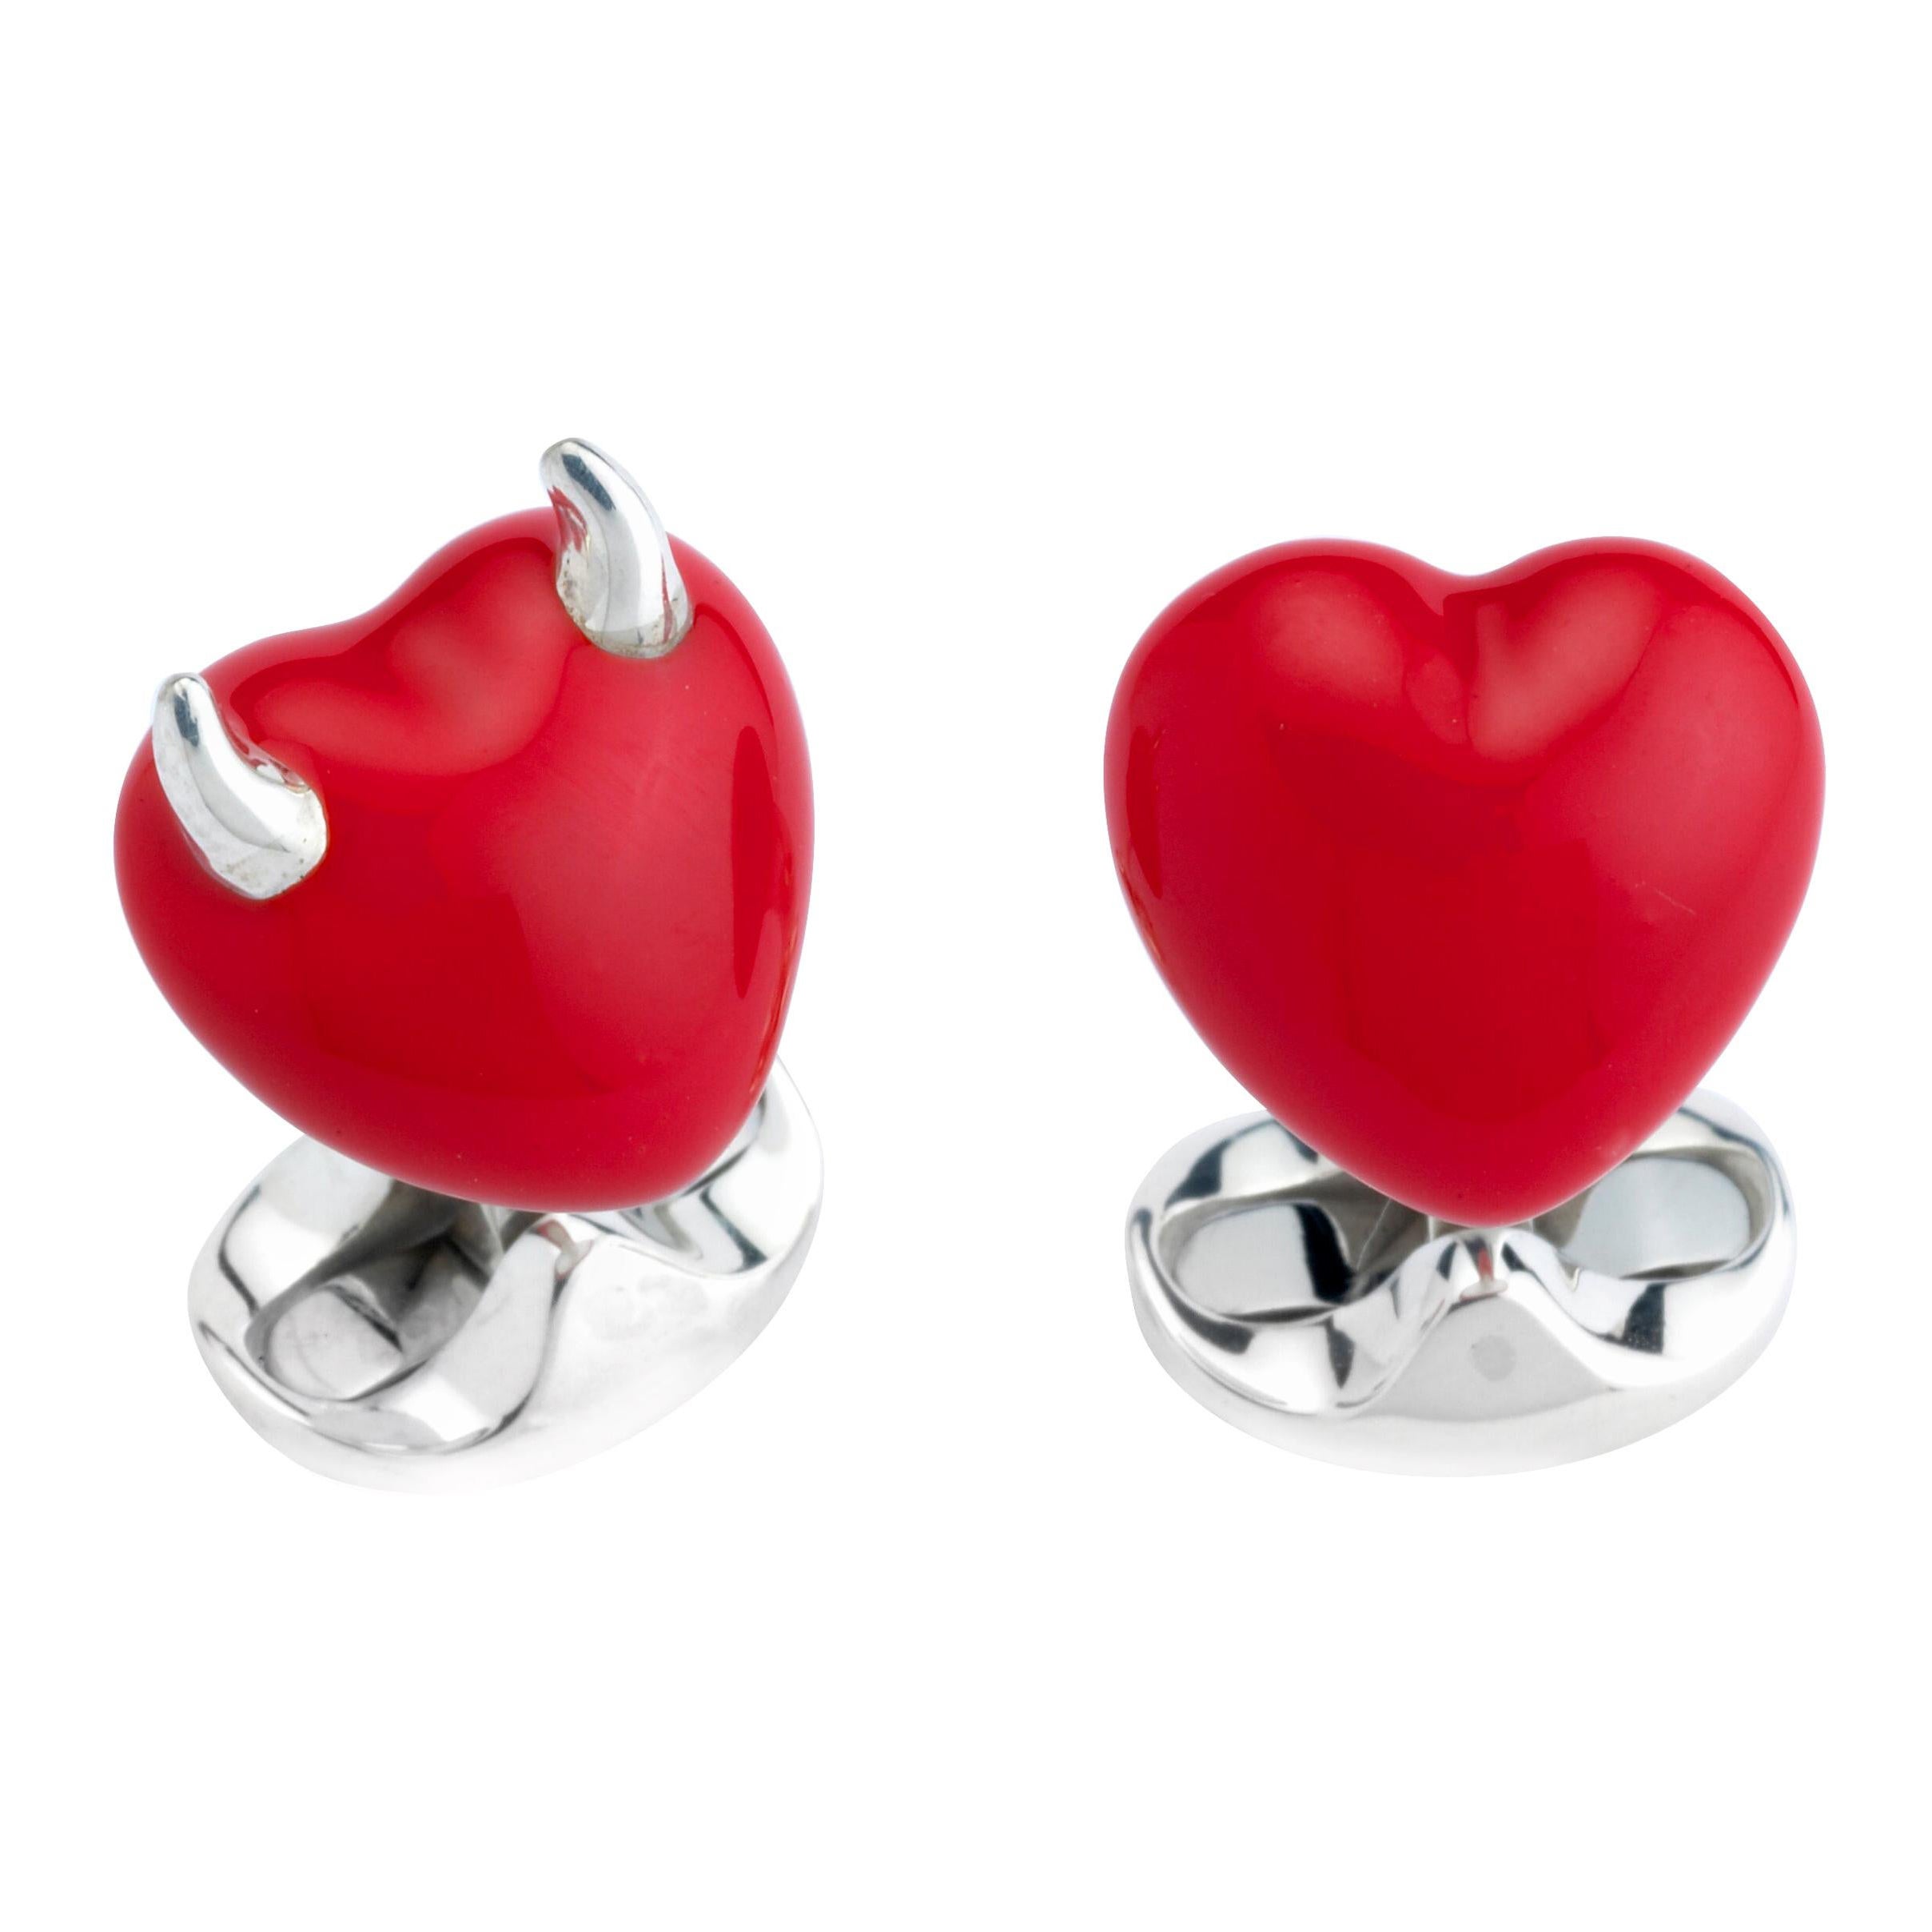 Deakin & Francis Sterling Silver Good and Bad Heart Cufflinks